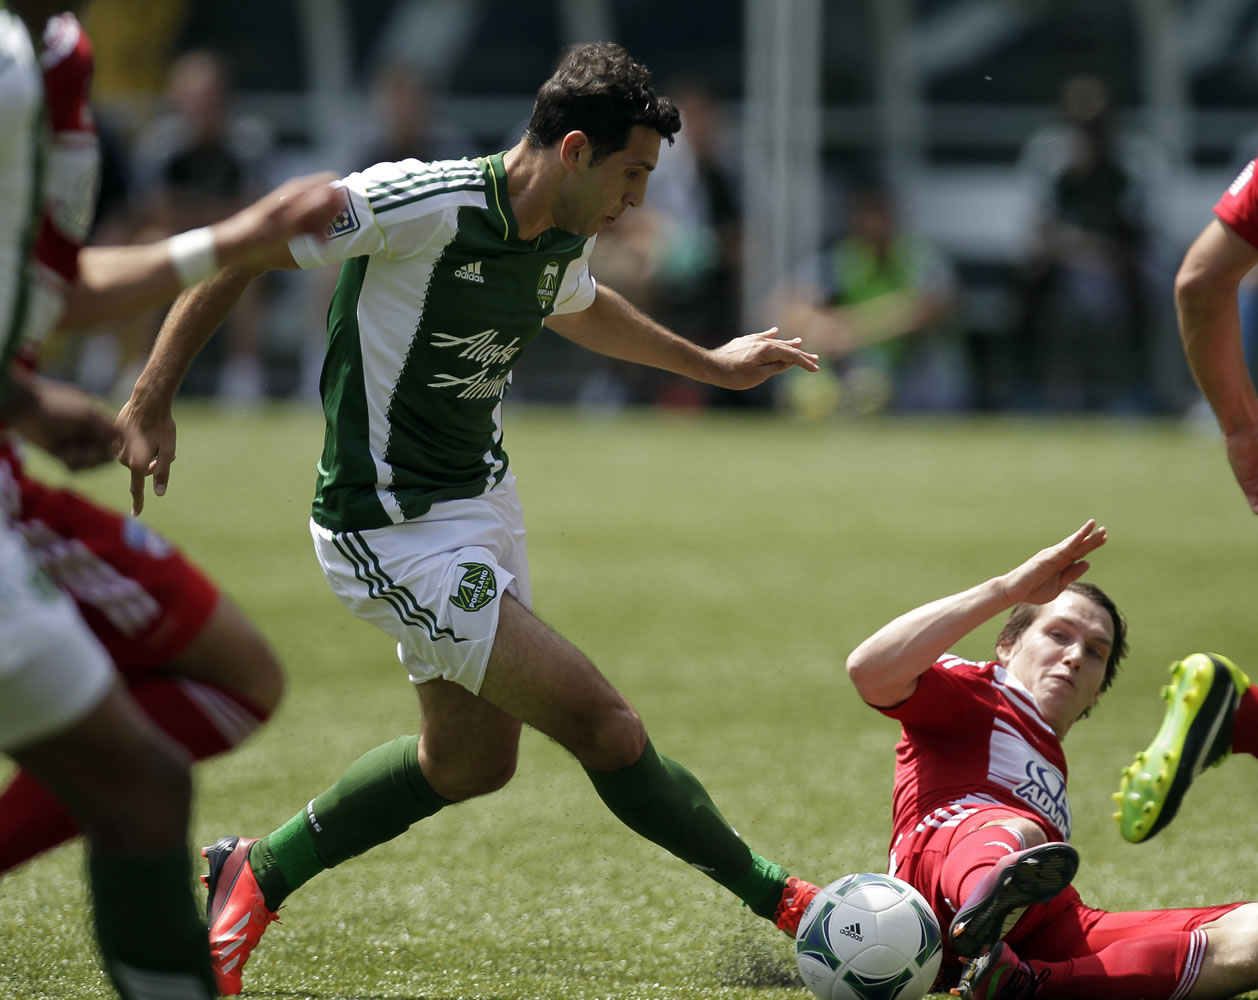 Portland Timbers midfielder Diego Valeri, left, is challenged by sliding FC Dallas defender Zach Loyd during the first half of the Timbers' 1-0 victory on June 9 at Jeld-Wen Field in Portland. The teams, who have split a pair of Major League Soccer matches this season, play today in Frisco, Texas, in the quarterfinals of the Lamar Hunt U.S.